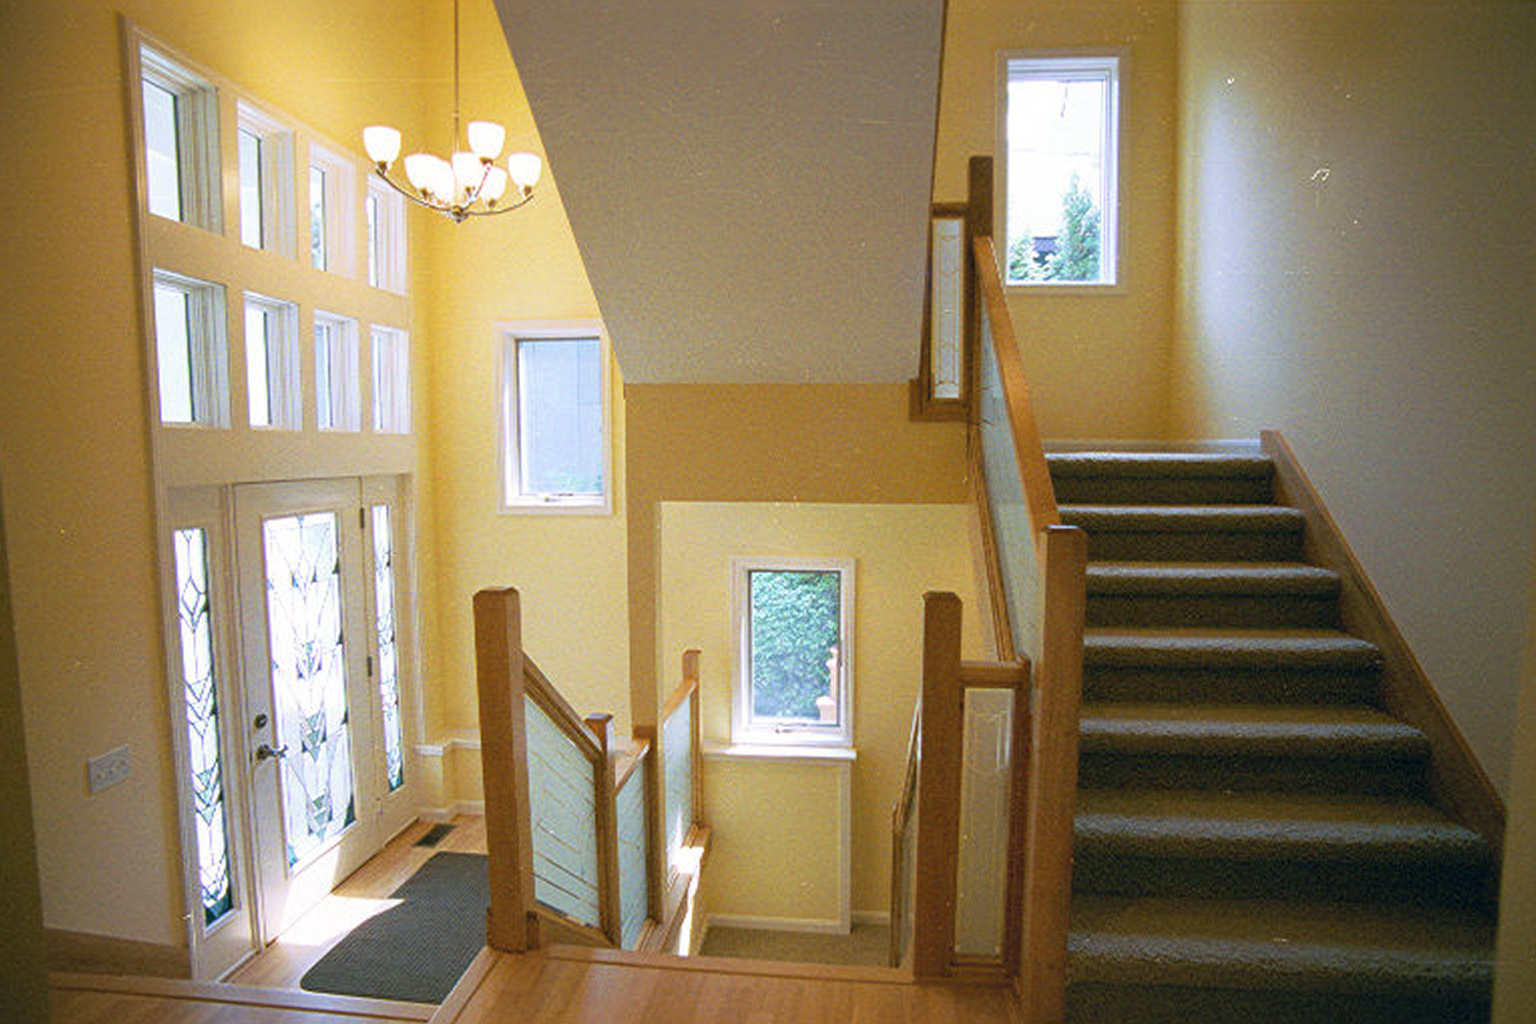 New home and remodeling stairway railings